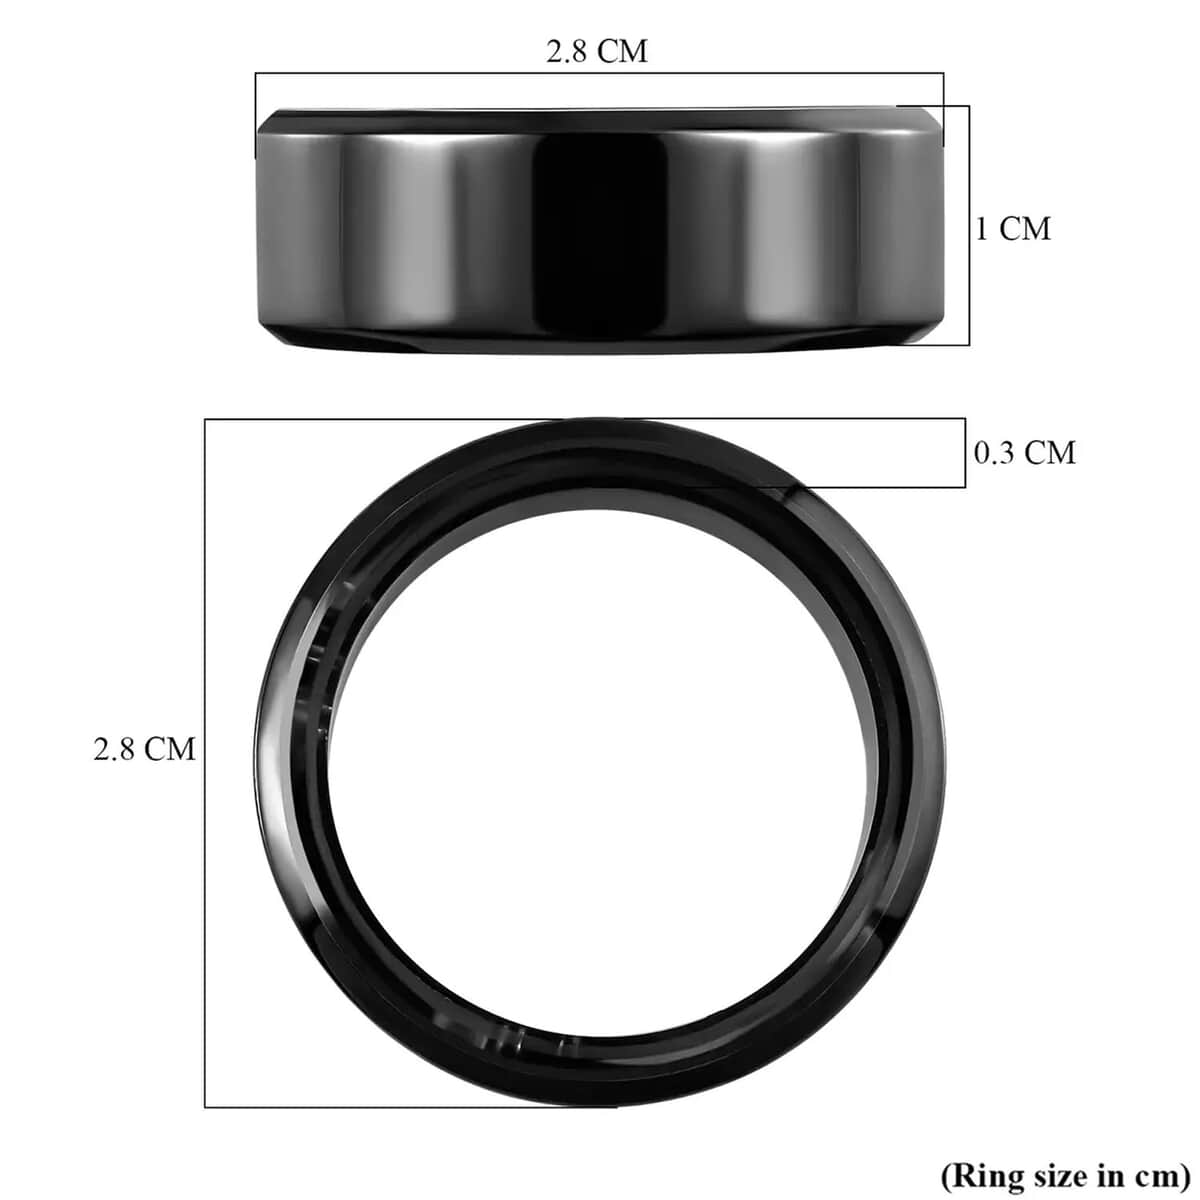 Soulsmart Multifunctional Health Tracker Smart Ring (Size 9.0) in ION Plated Black Stainless Steel (Compatible with Android 5.0+ & Apple IOS 10.0+ Systems) image number 7